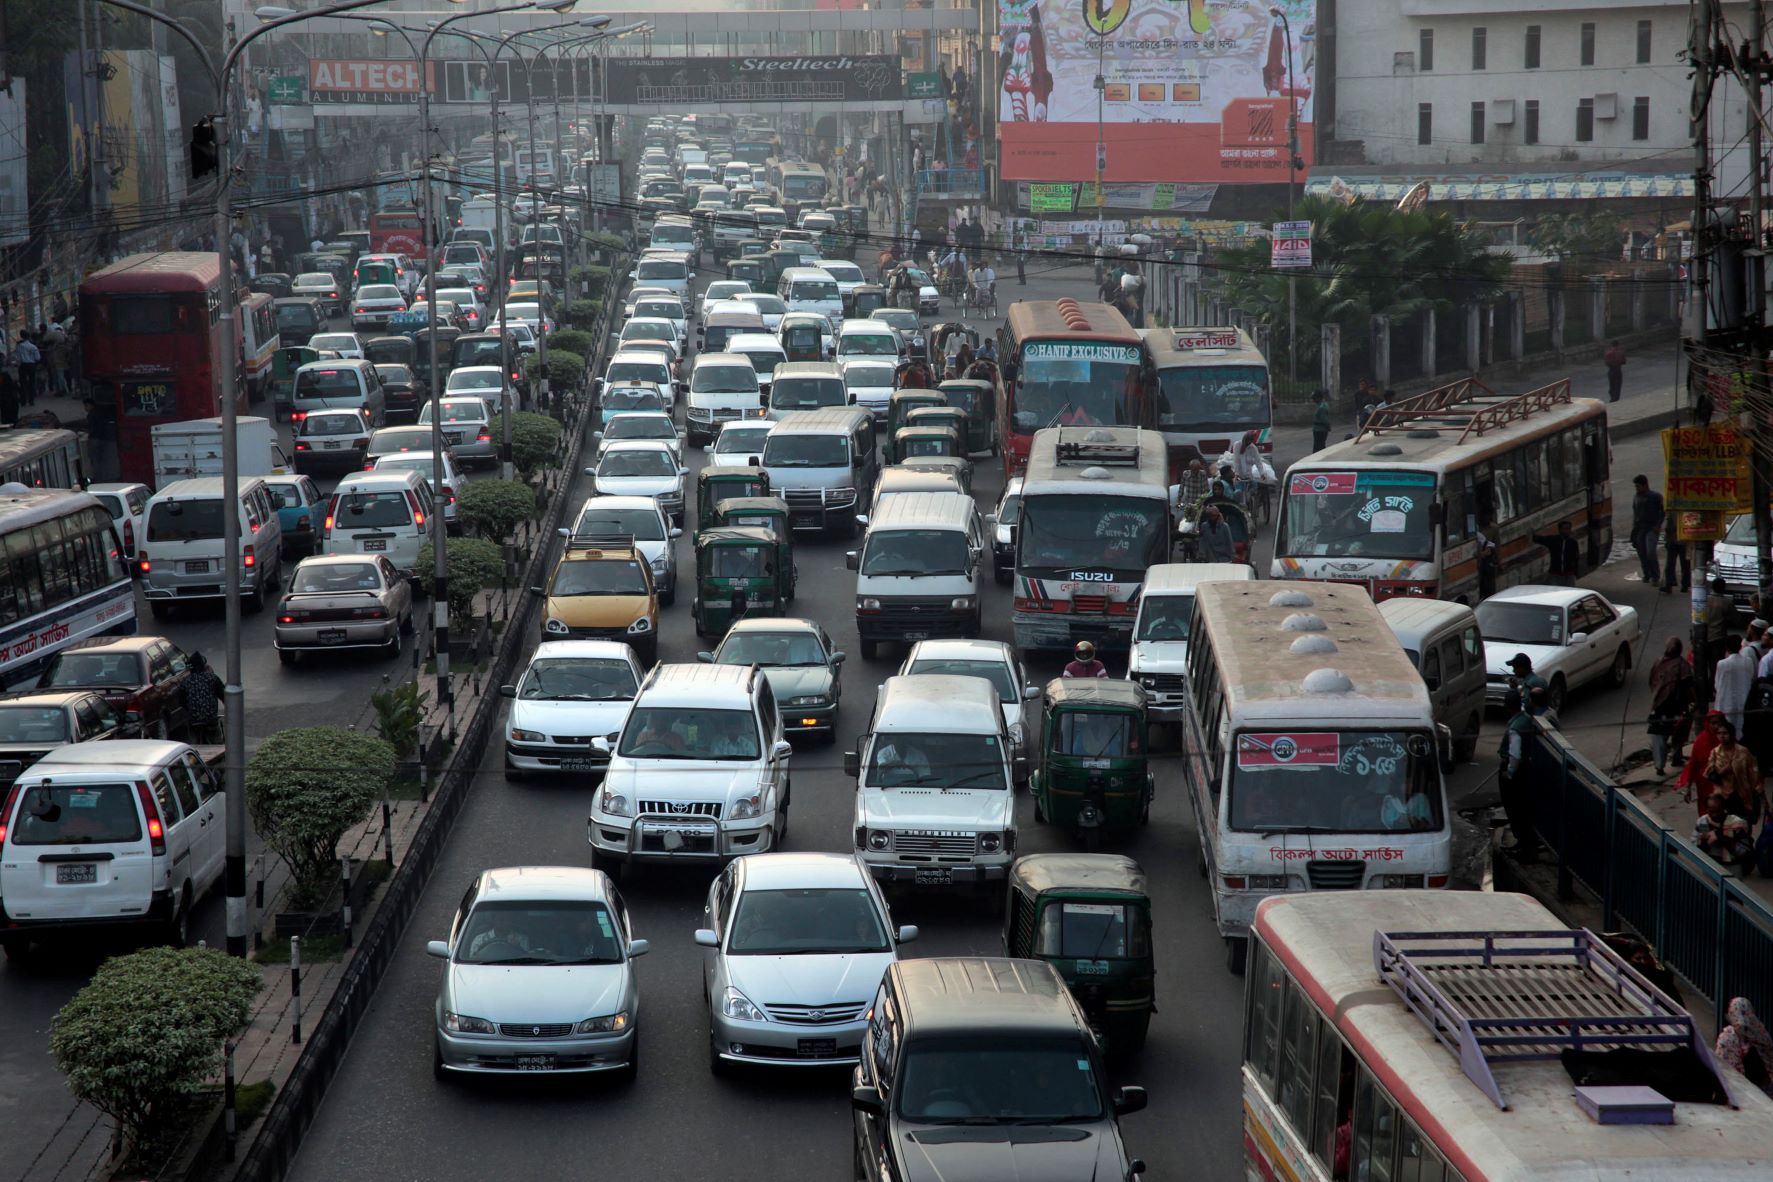 Key sources of air pollution in Dhaka are at the confluence of construction sites and heavy traffic